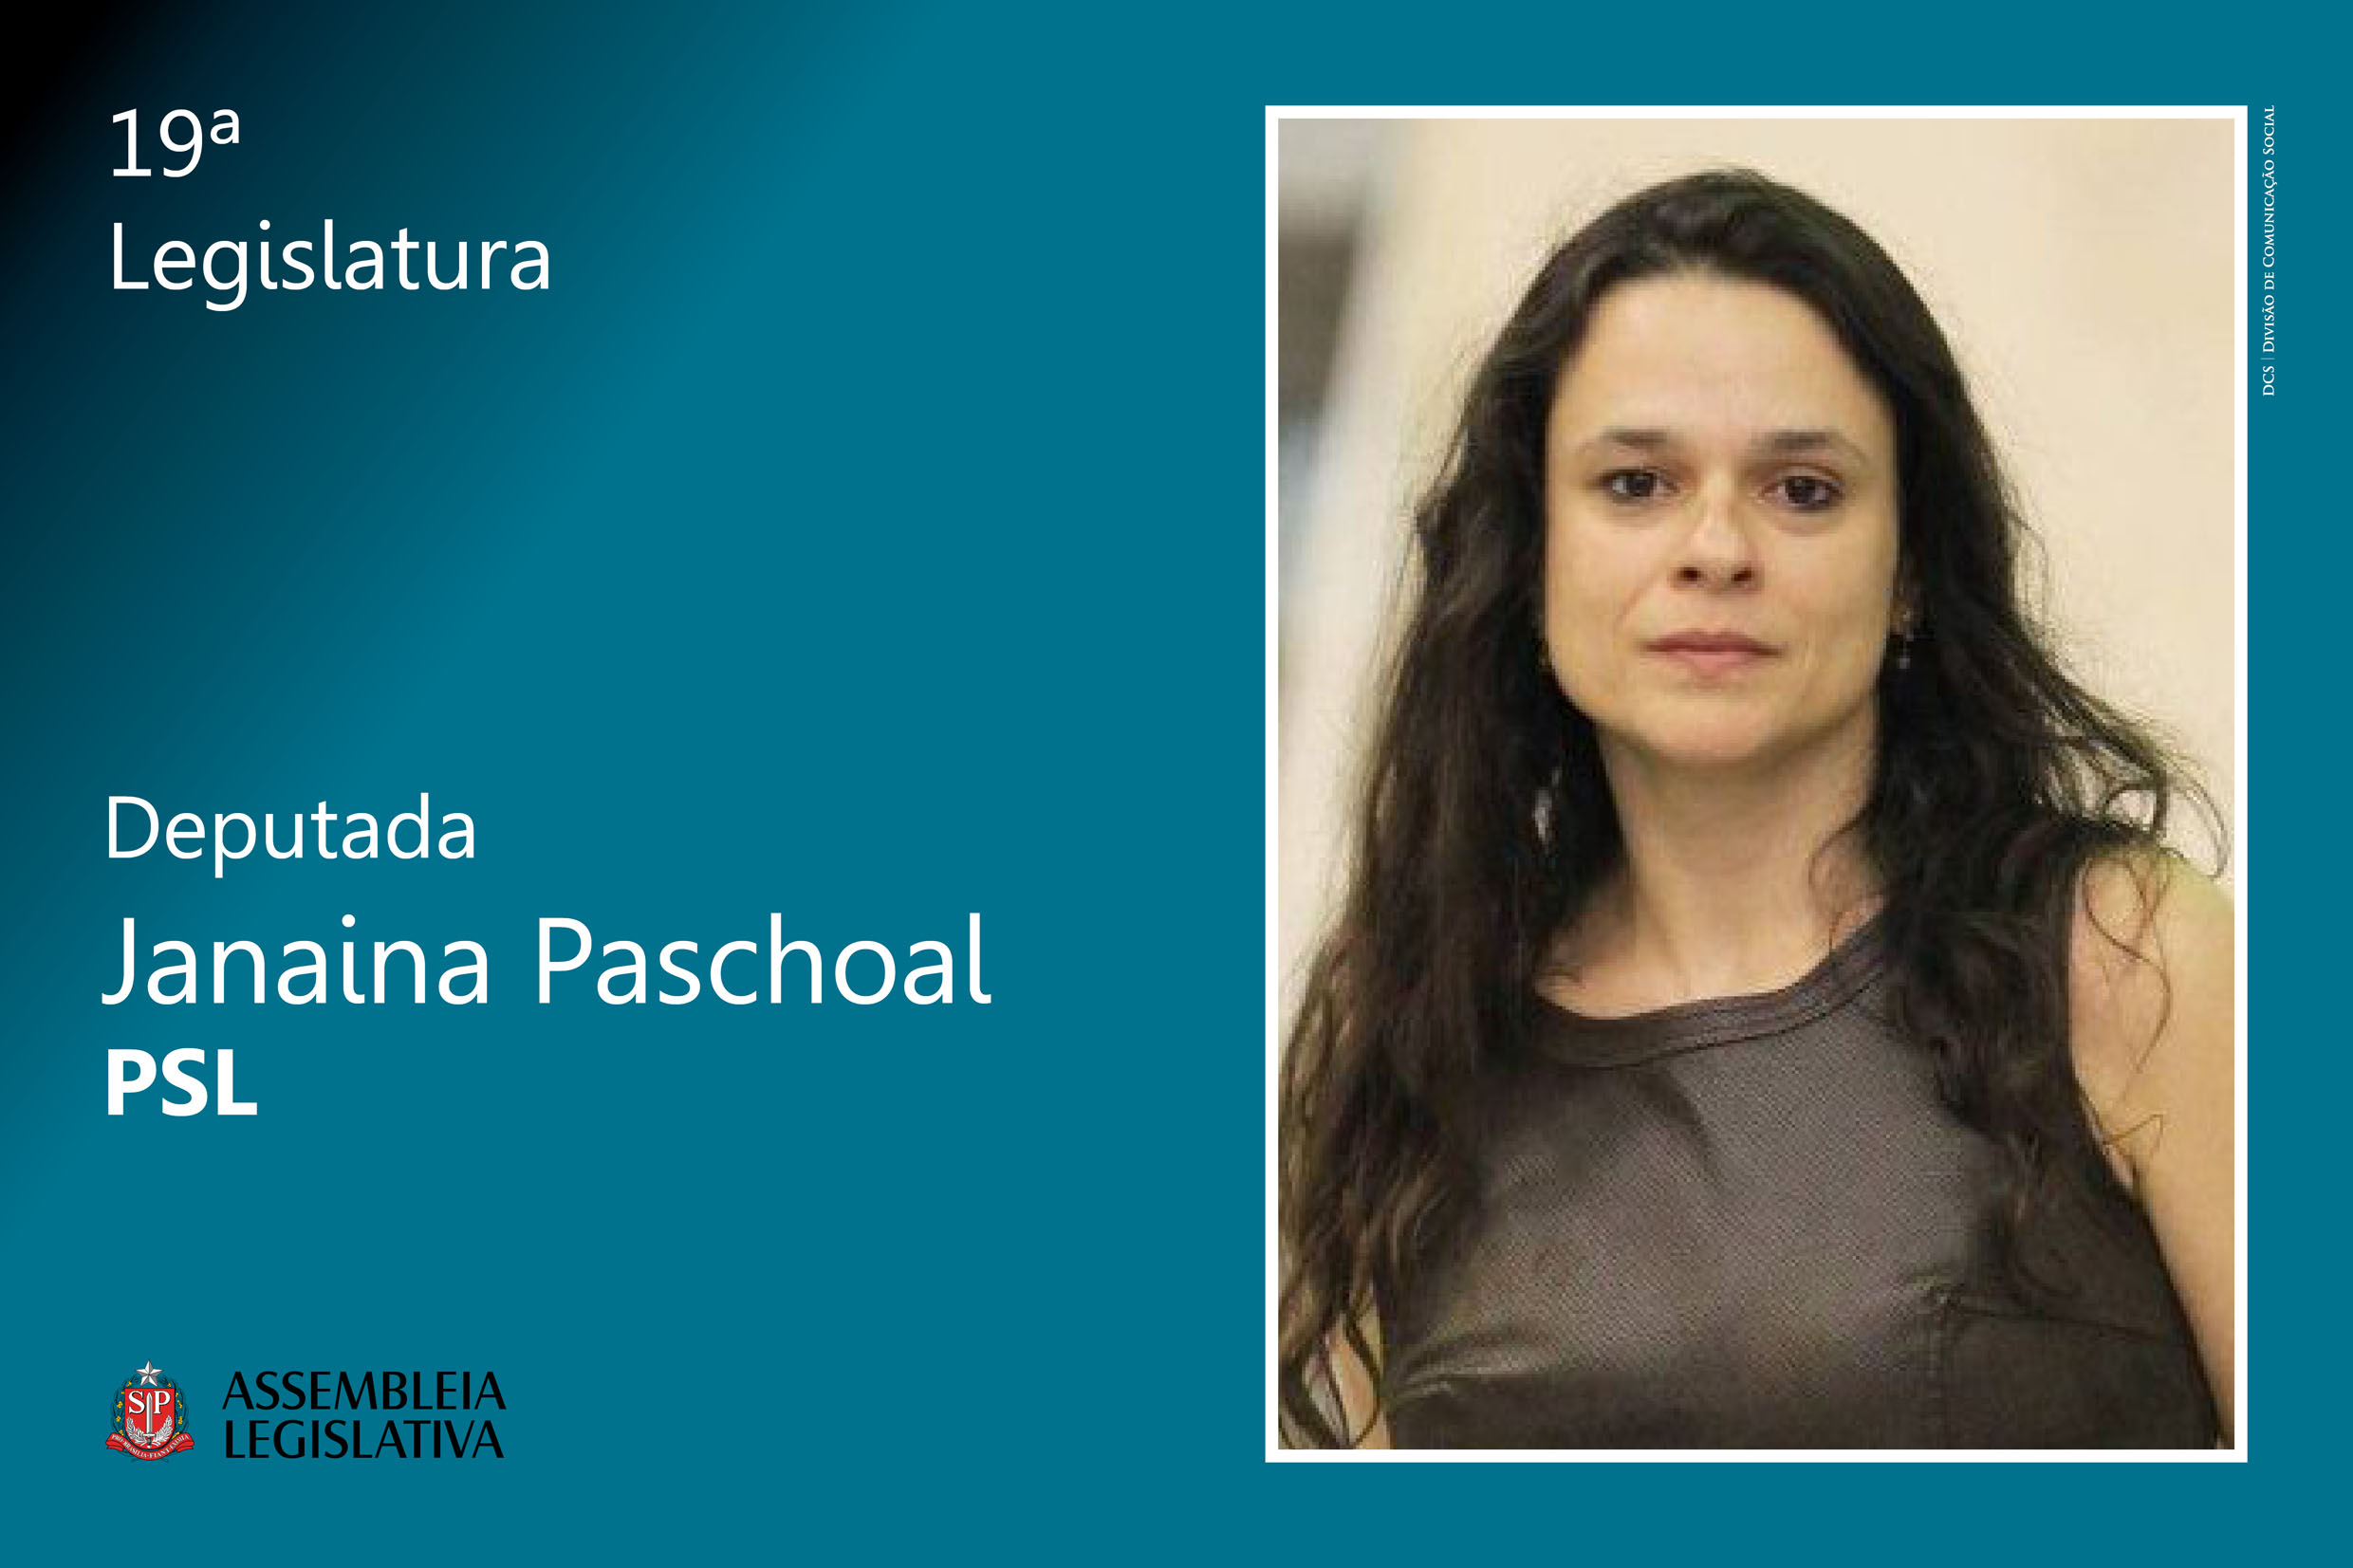 Janaina Paschoal (PSL)<a style='float:right;color:#ccc' href='https://www3.al.sp.gov.br/repositorio/noticia/N-03-2019/fg231299.jpg' target=_blank><i class='bi bi-zoom-in'></i> Clique para ver a imagem </a>